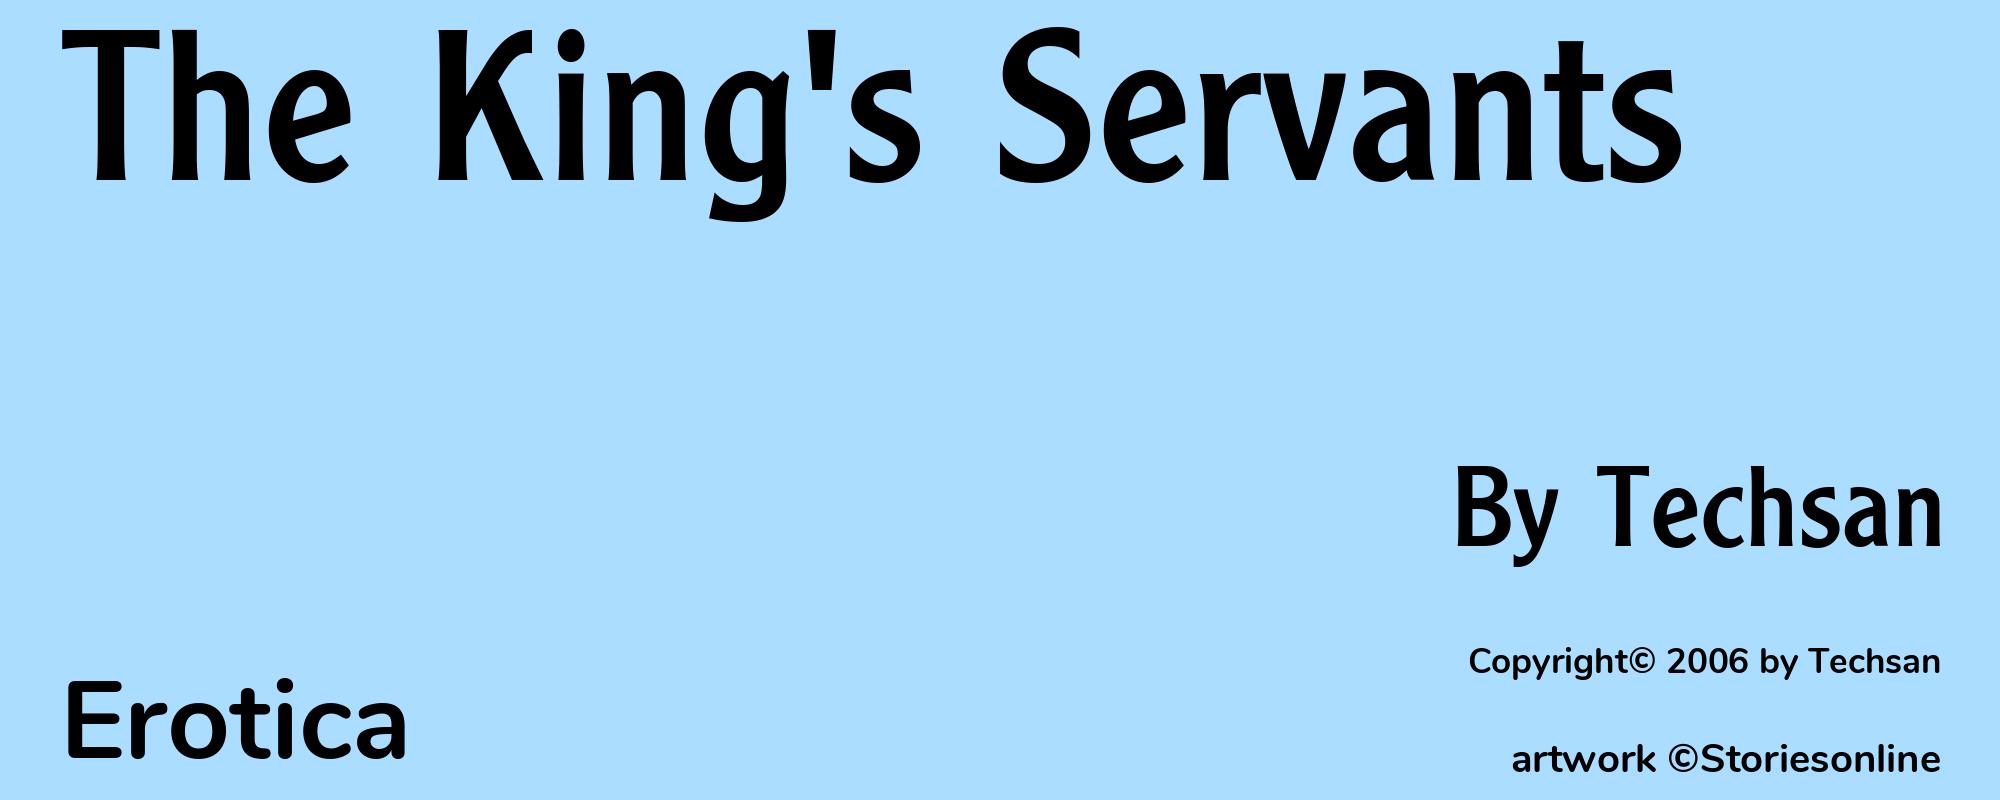 The King's Servants - Cover